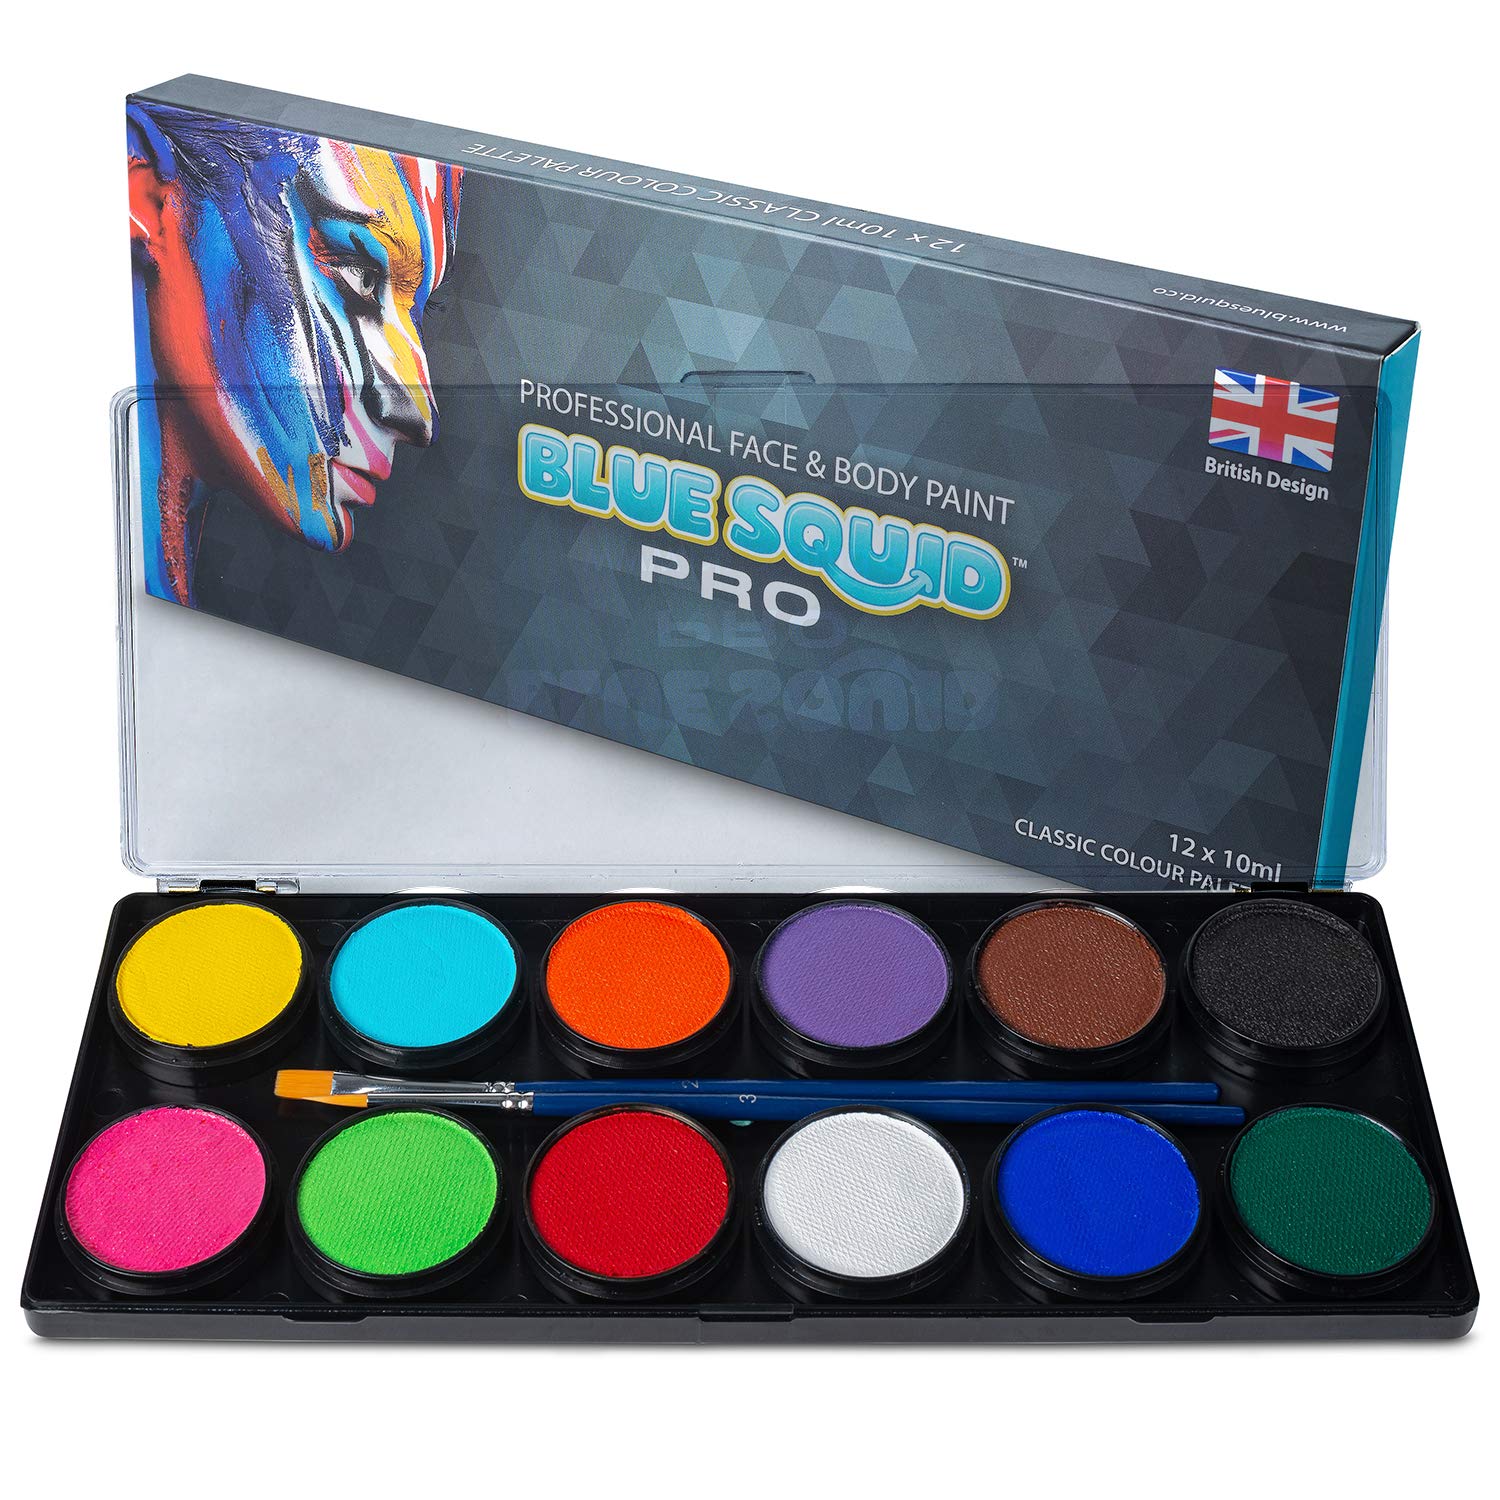 Professional Face Paint Kit - by Blue Squid Pro, 12X10G Classic Color Palette, Professional Face & Body Painting Supplies SFX, Adult & Kids, Superio